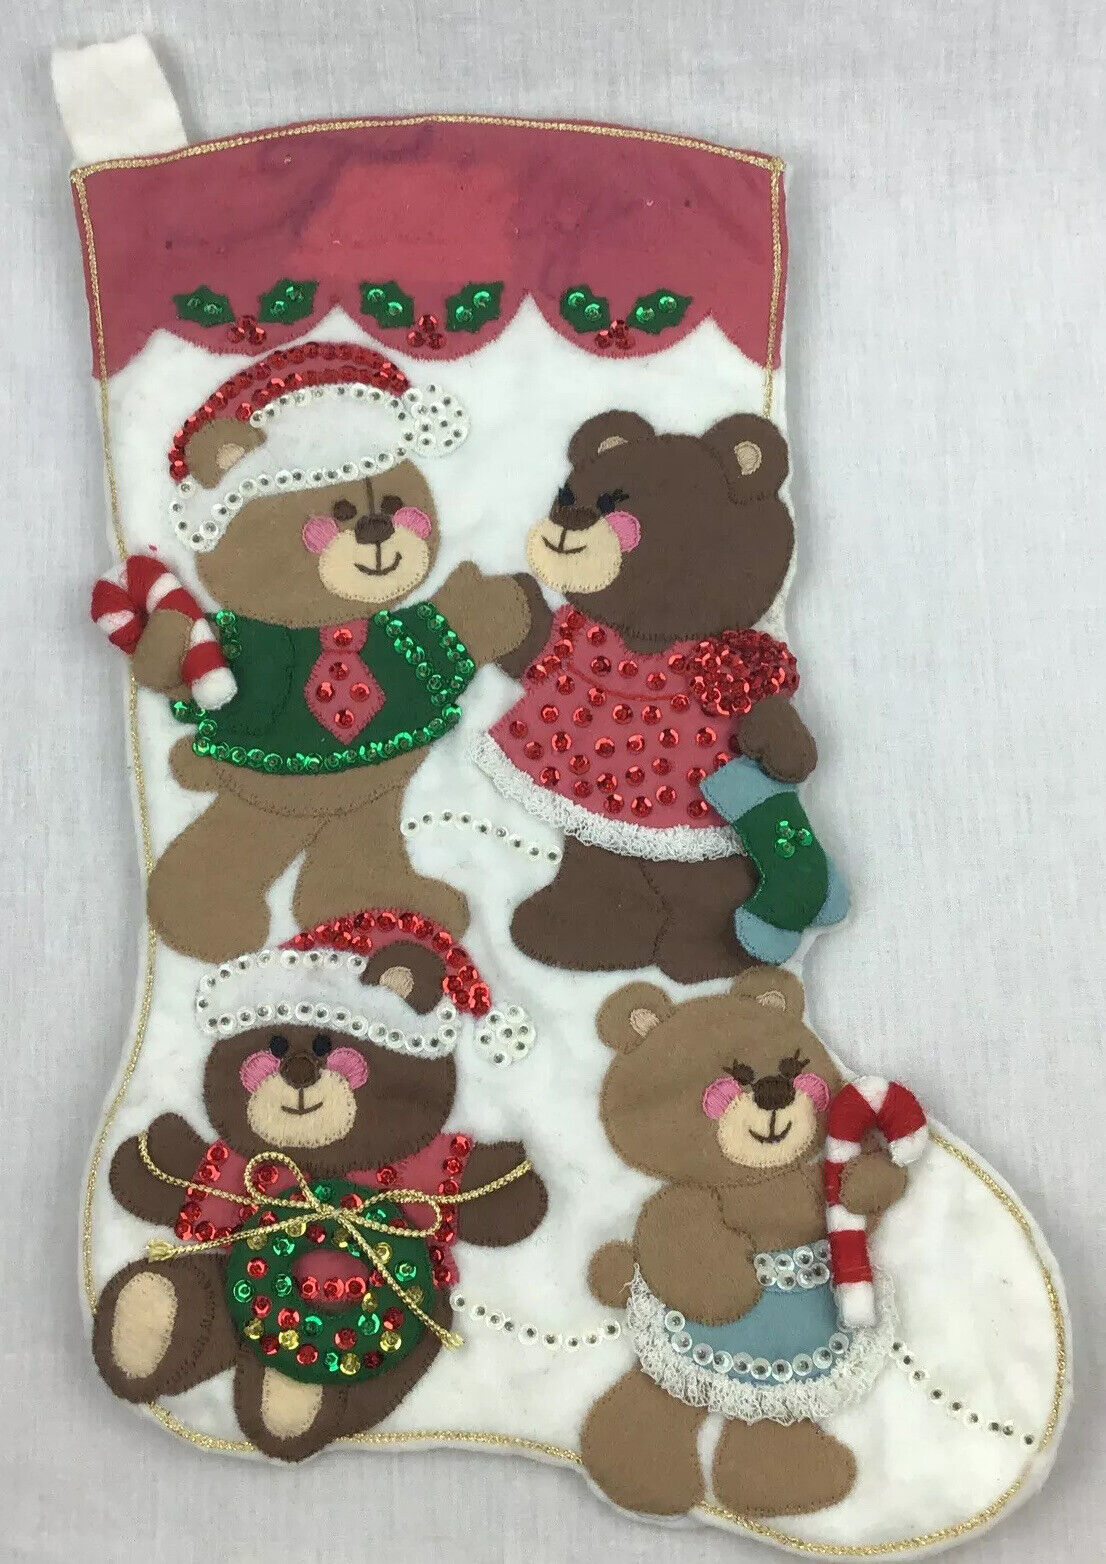 Felt Christmas Stocking Teddy Bears Finished Completed Sequin Beads Vintage